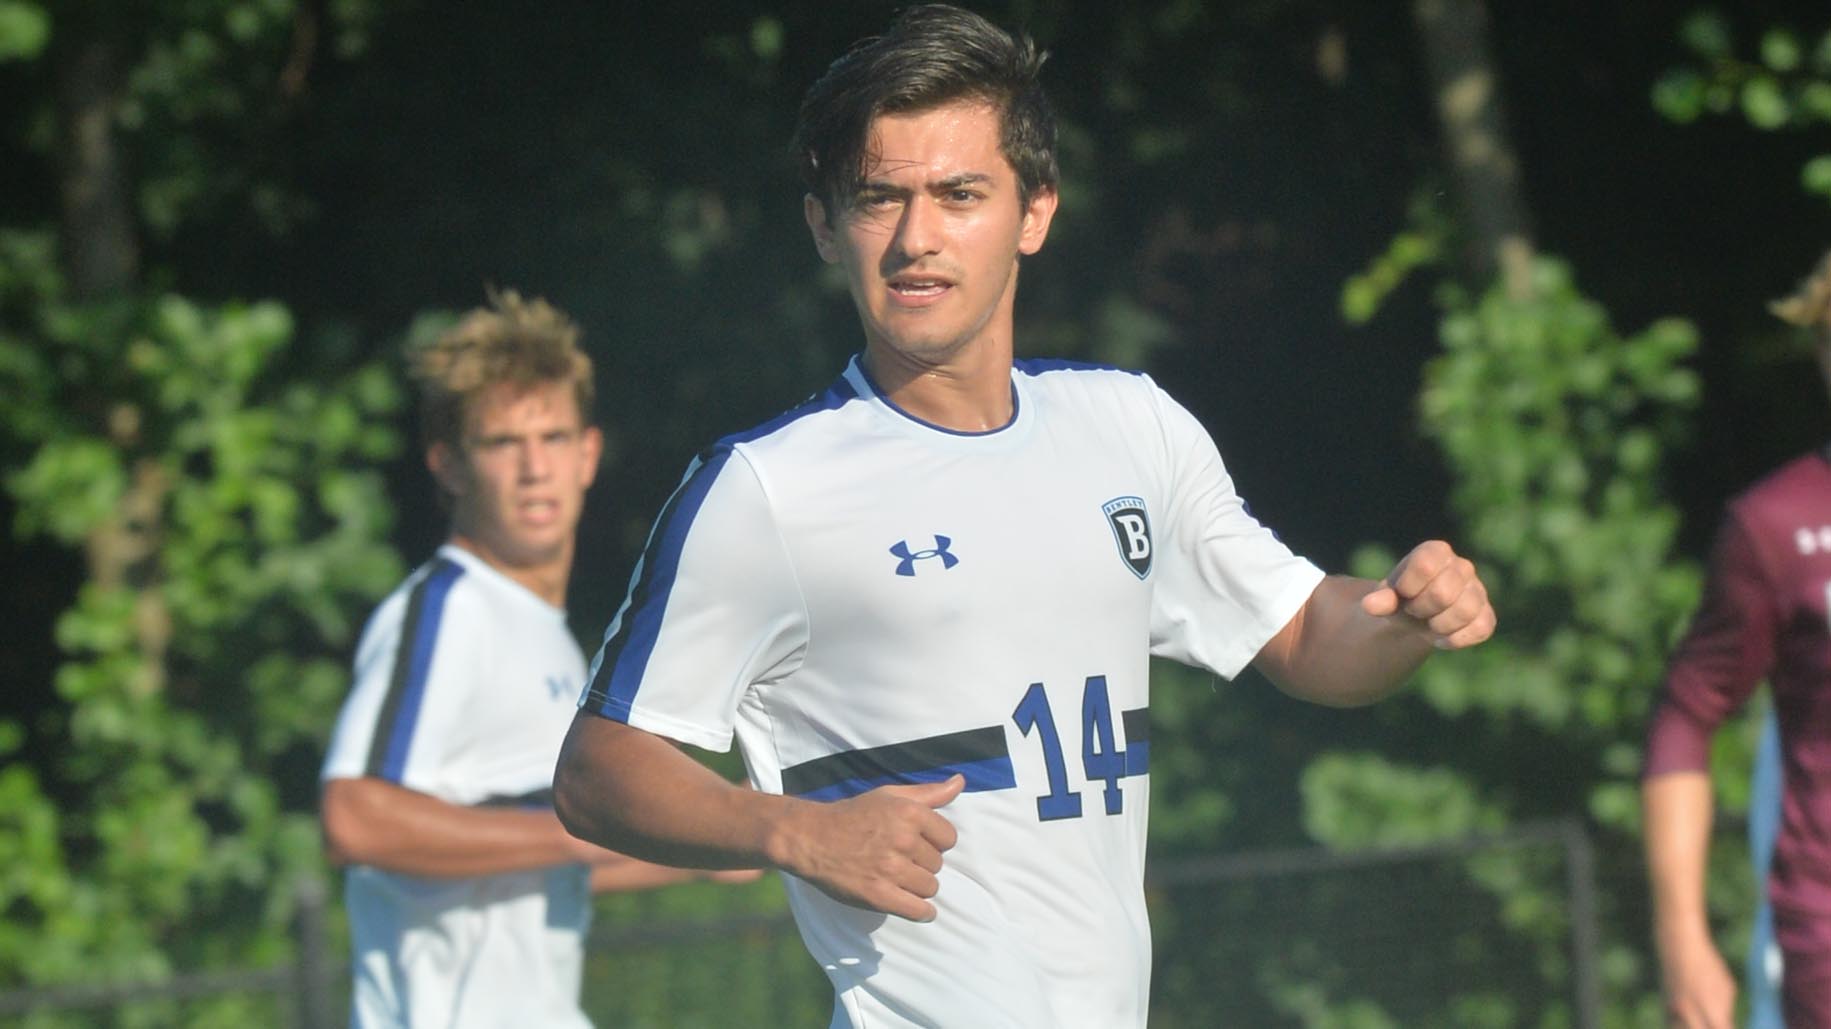 Bentley Earns 1-1 Draw with No. 20 Ranked Adelphi